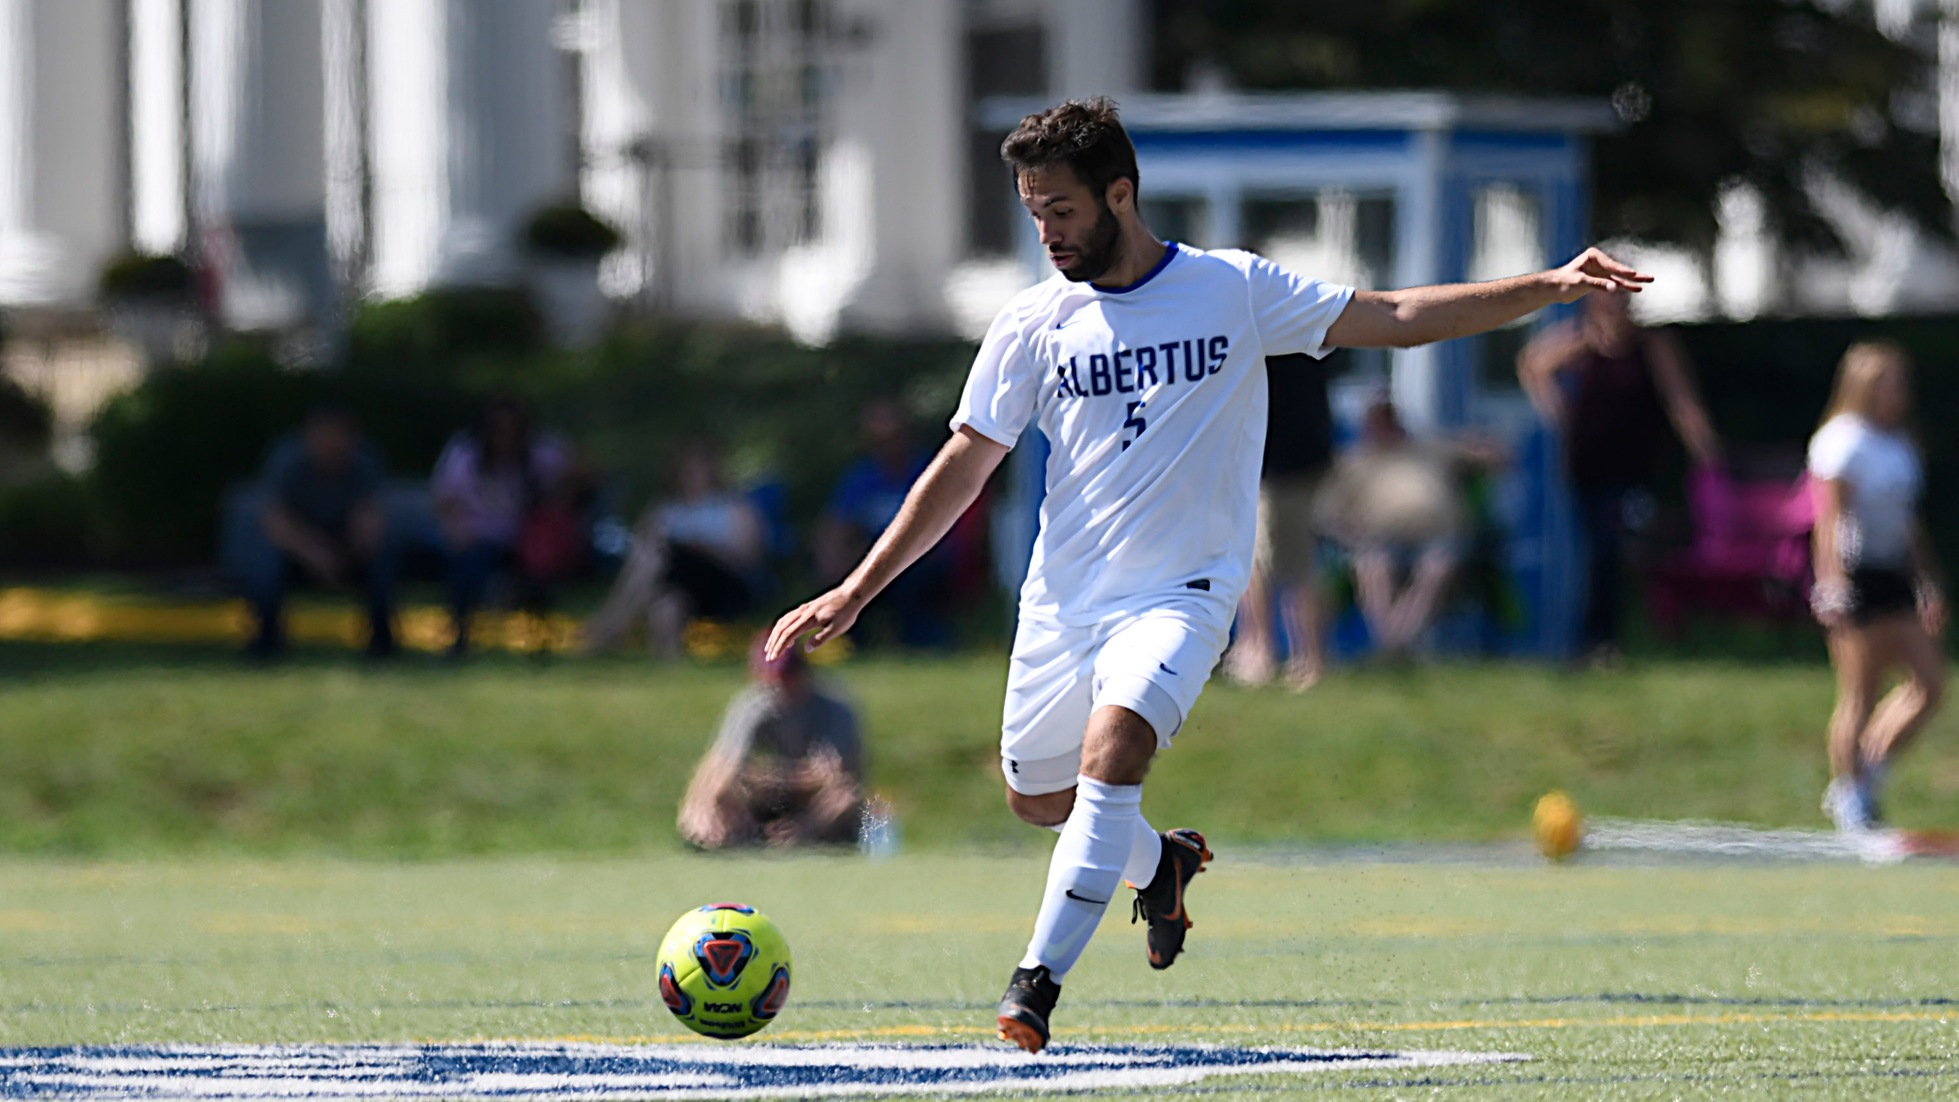 Men's Soccer Draws 2-2 Tie with Regis (Mass.) in Conference Play